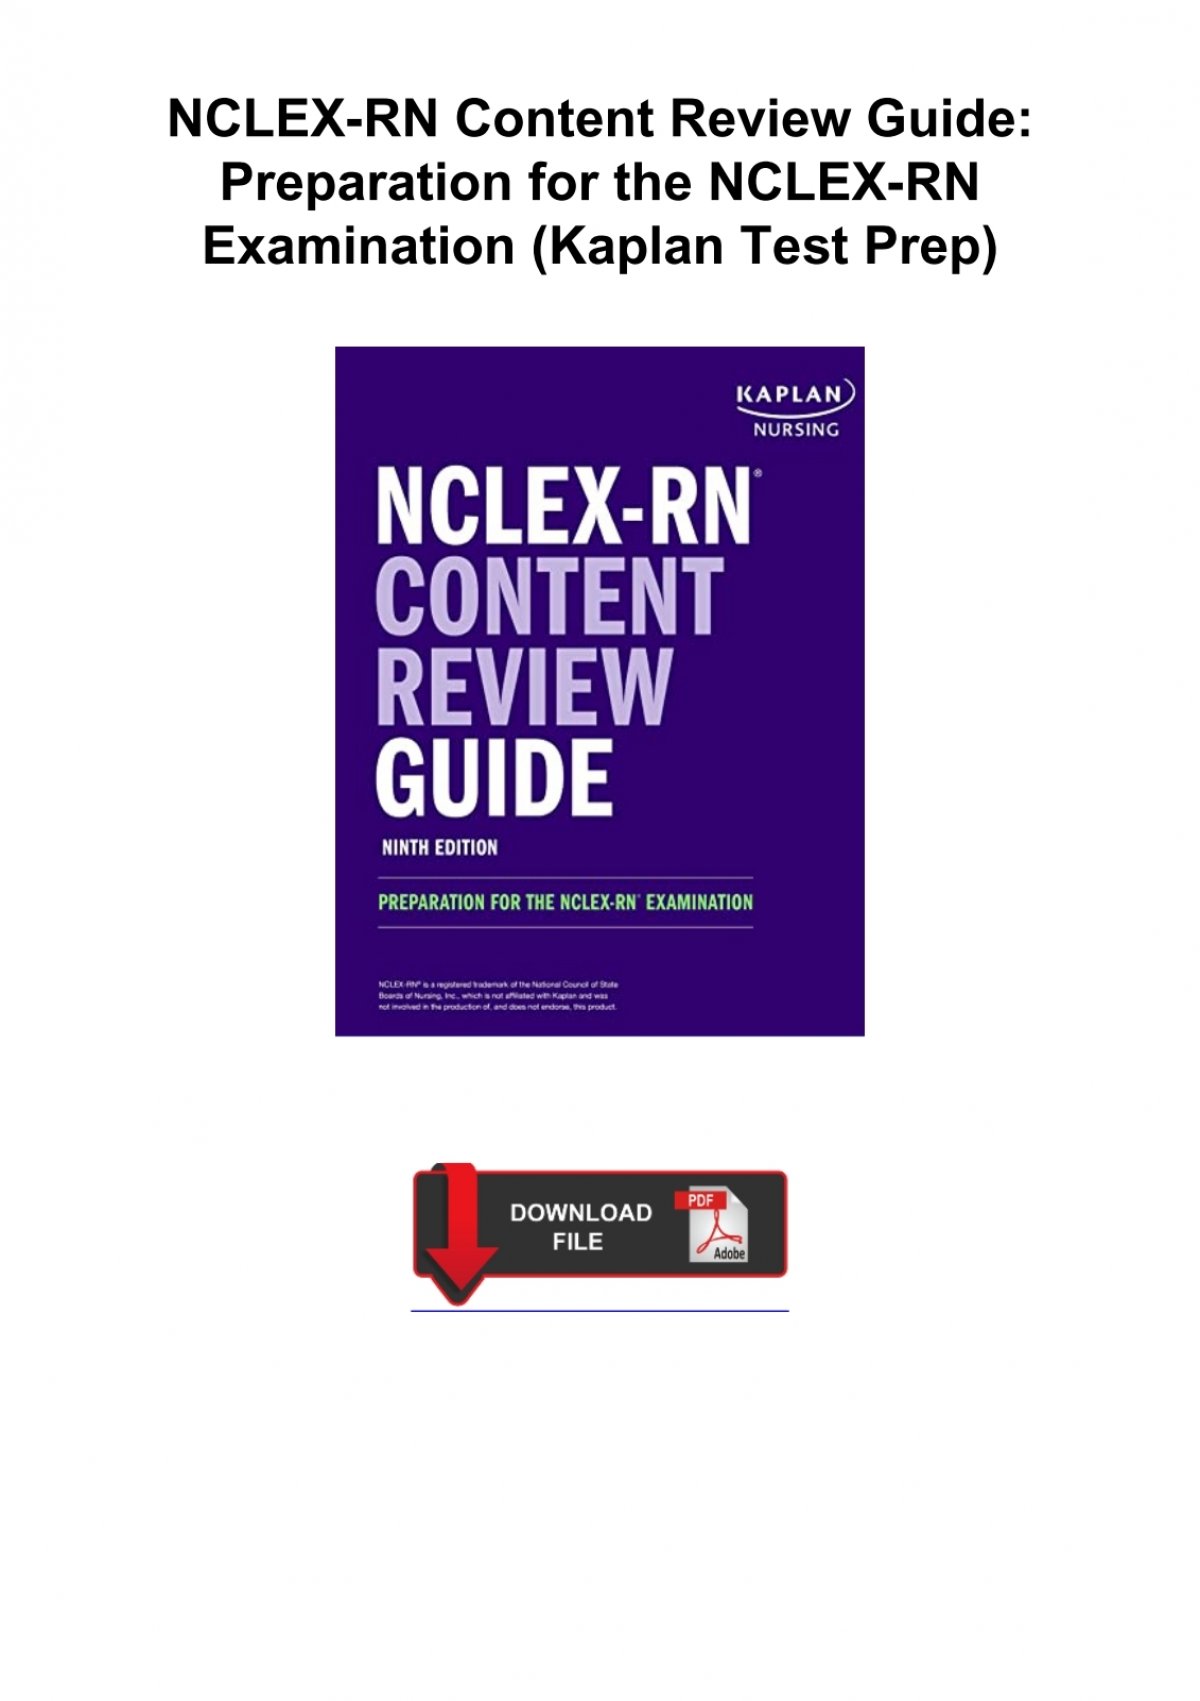 NCLEX-RN Content Review Guide by Kaplan, Paperback